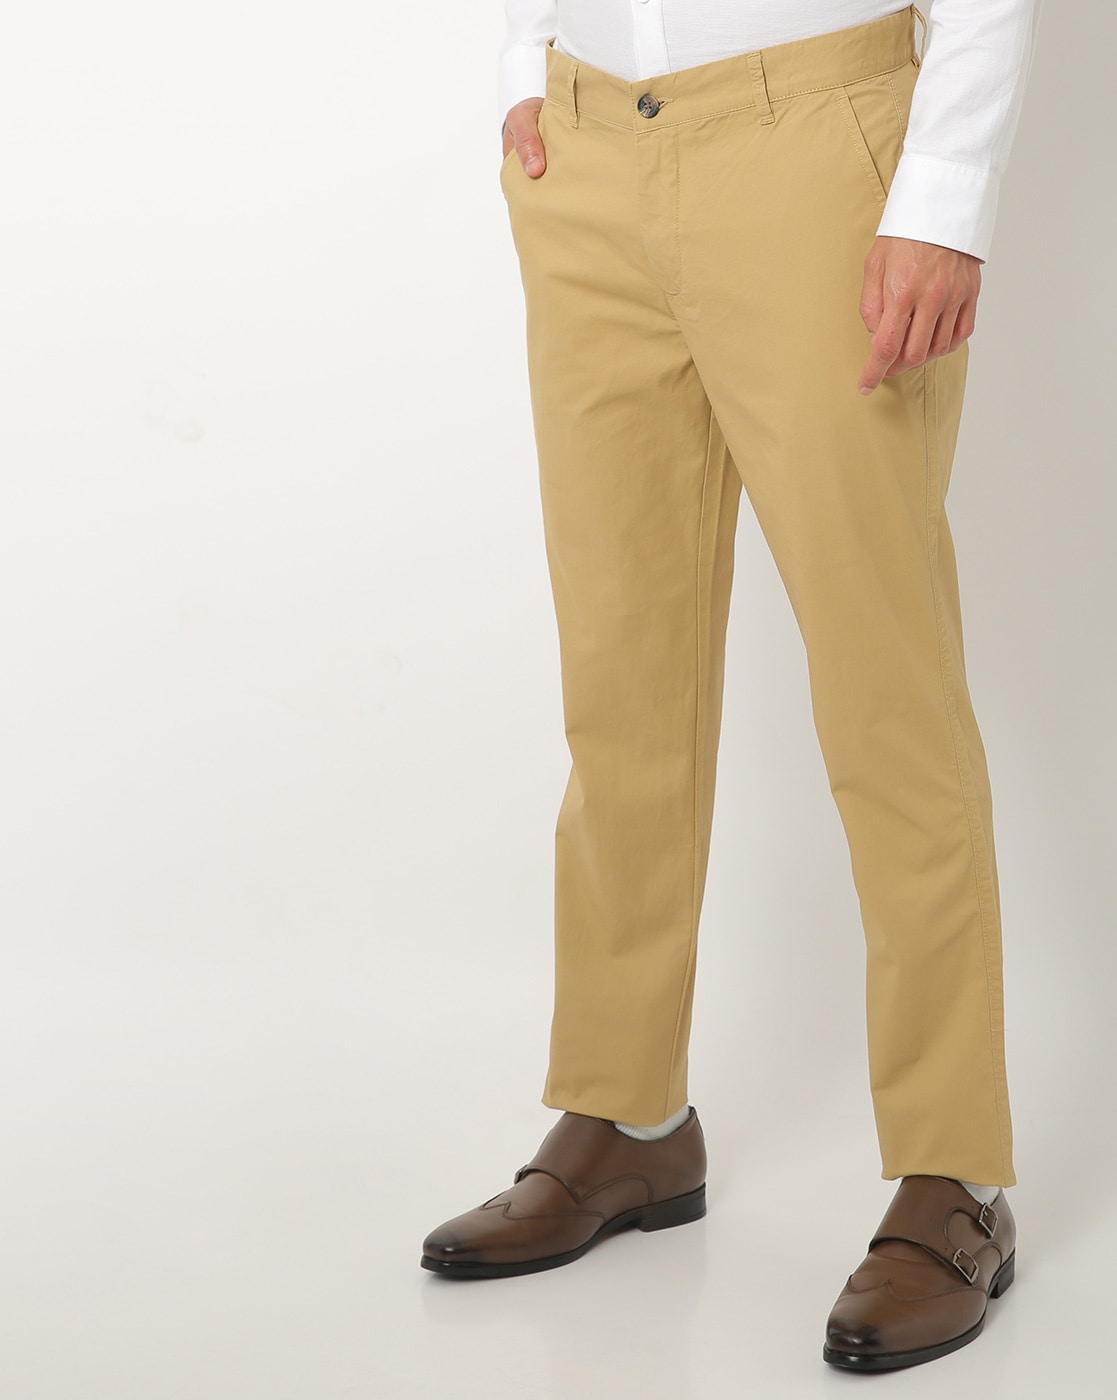 Buy UNITED COLORS OF BENETTON Solid Polyester Cotton Slim Fit Mens Trousers   Shoppers Stop